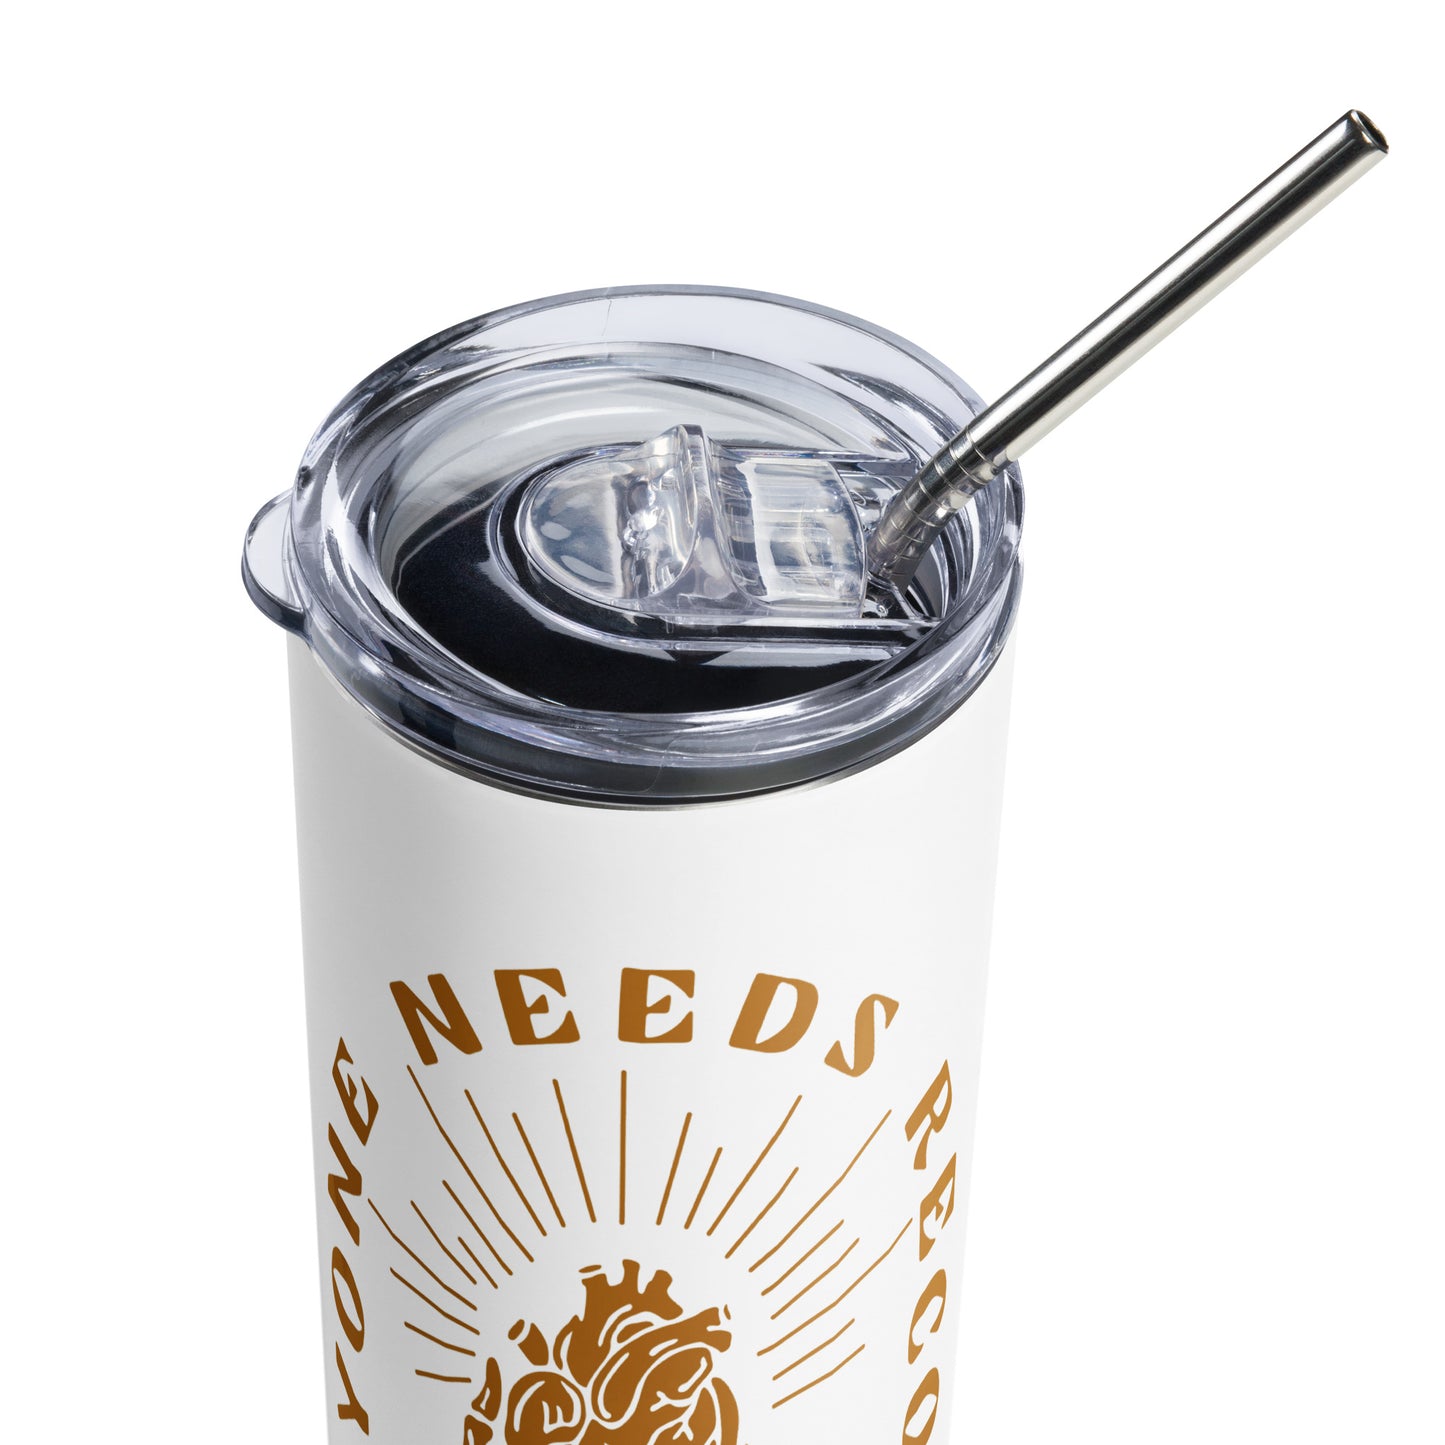 "Everyone Needs Recovery" Stainless steel tumbler